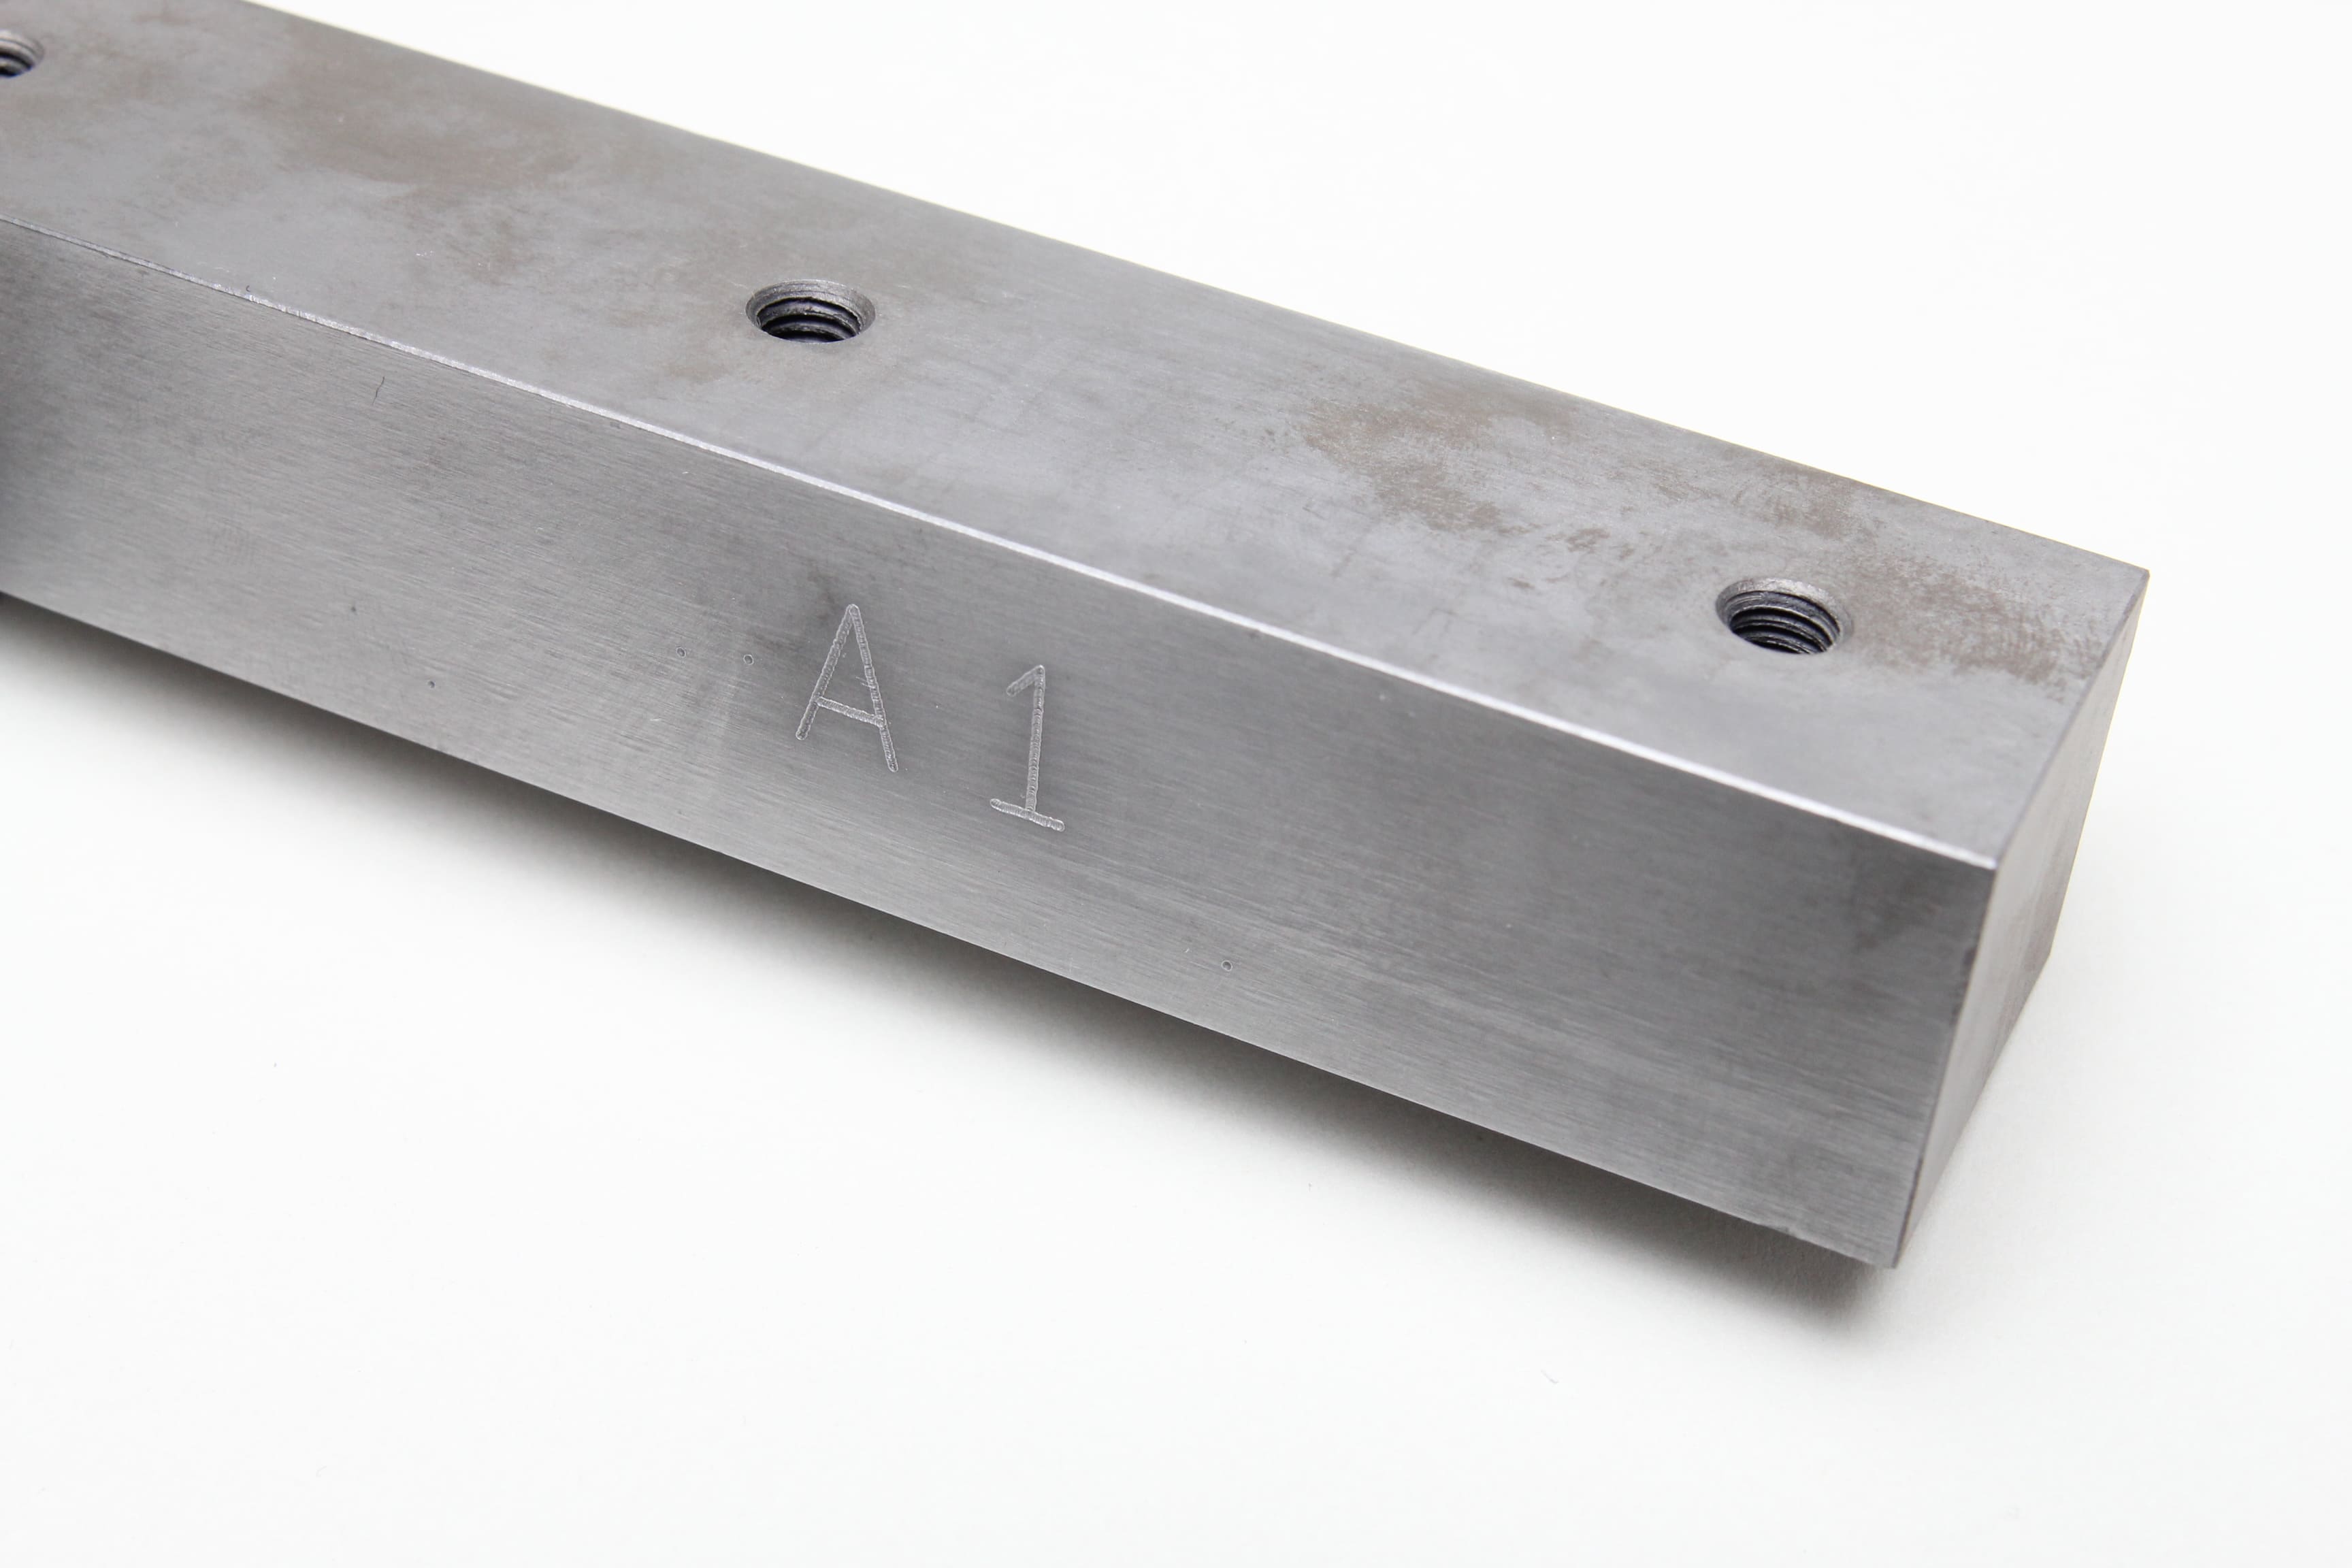 Image of hardened steel material engraved with text and numbers reading 'A1'.